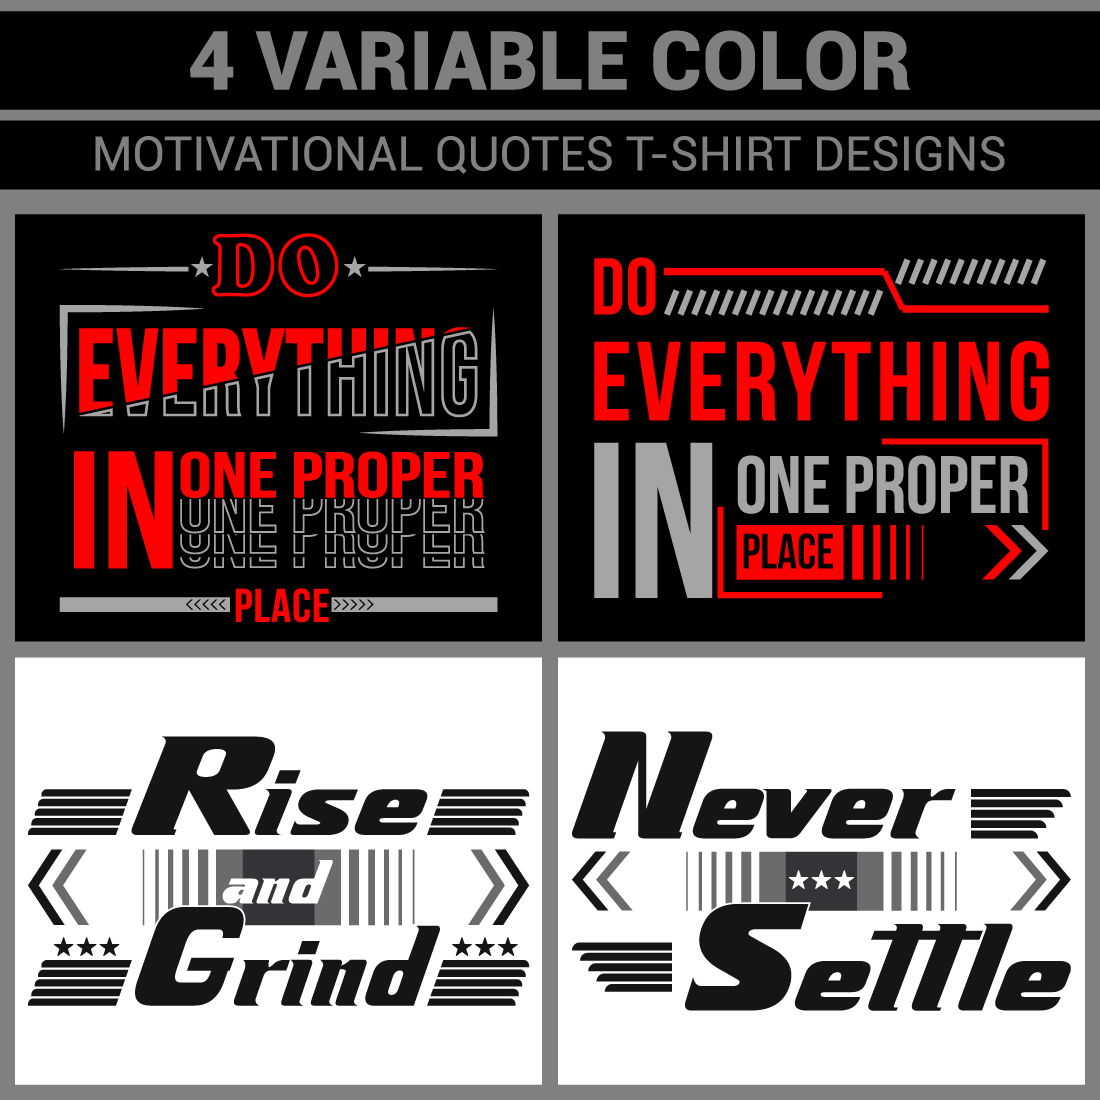 4 Variable Color Motivational Quotes T-Shirt Designs cover image.